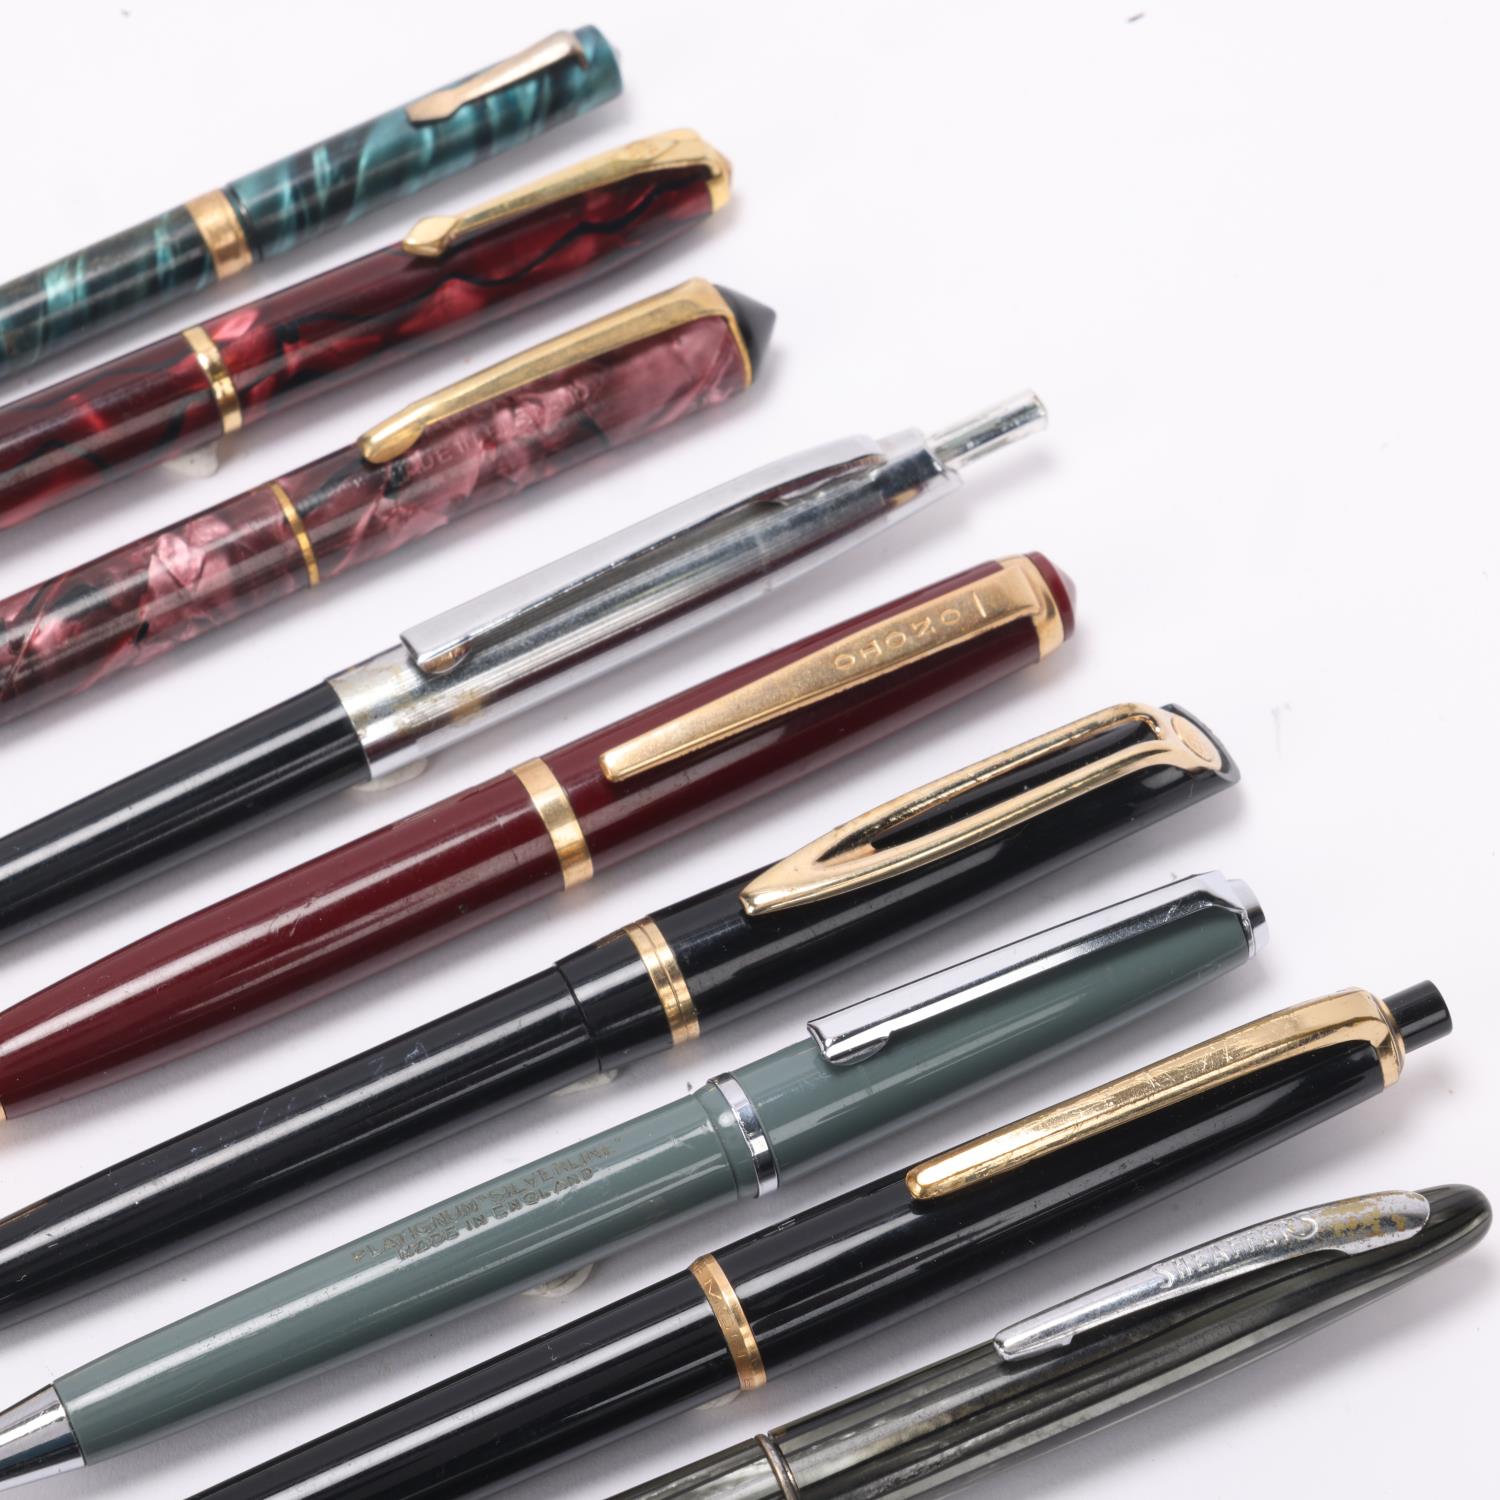 A collection of 9 vintage propelling pencils, including models by Onoto, Conway, Sheaffer, - Image 3 of 4